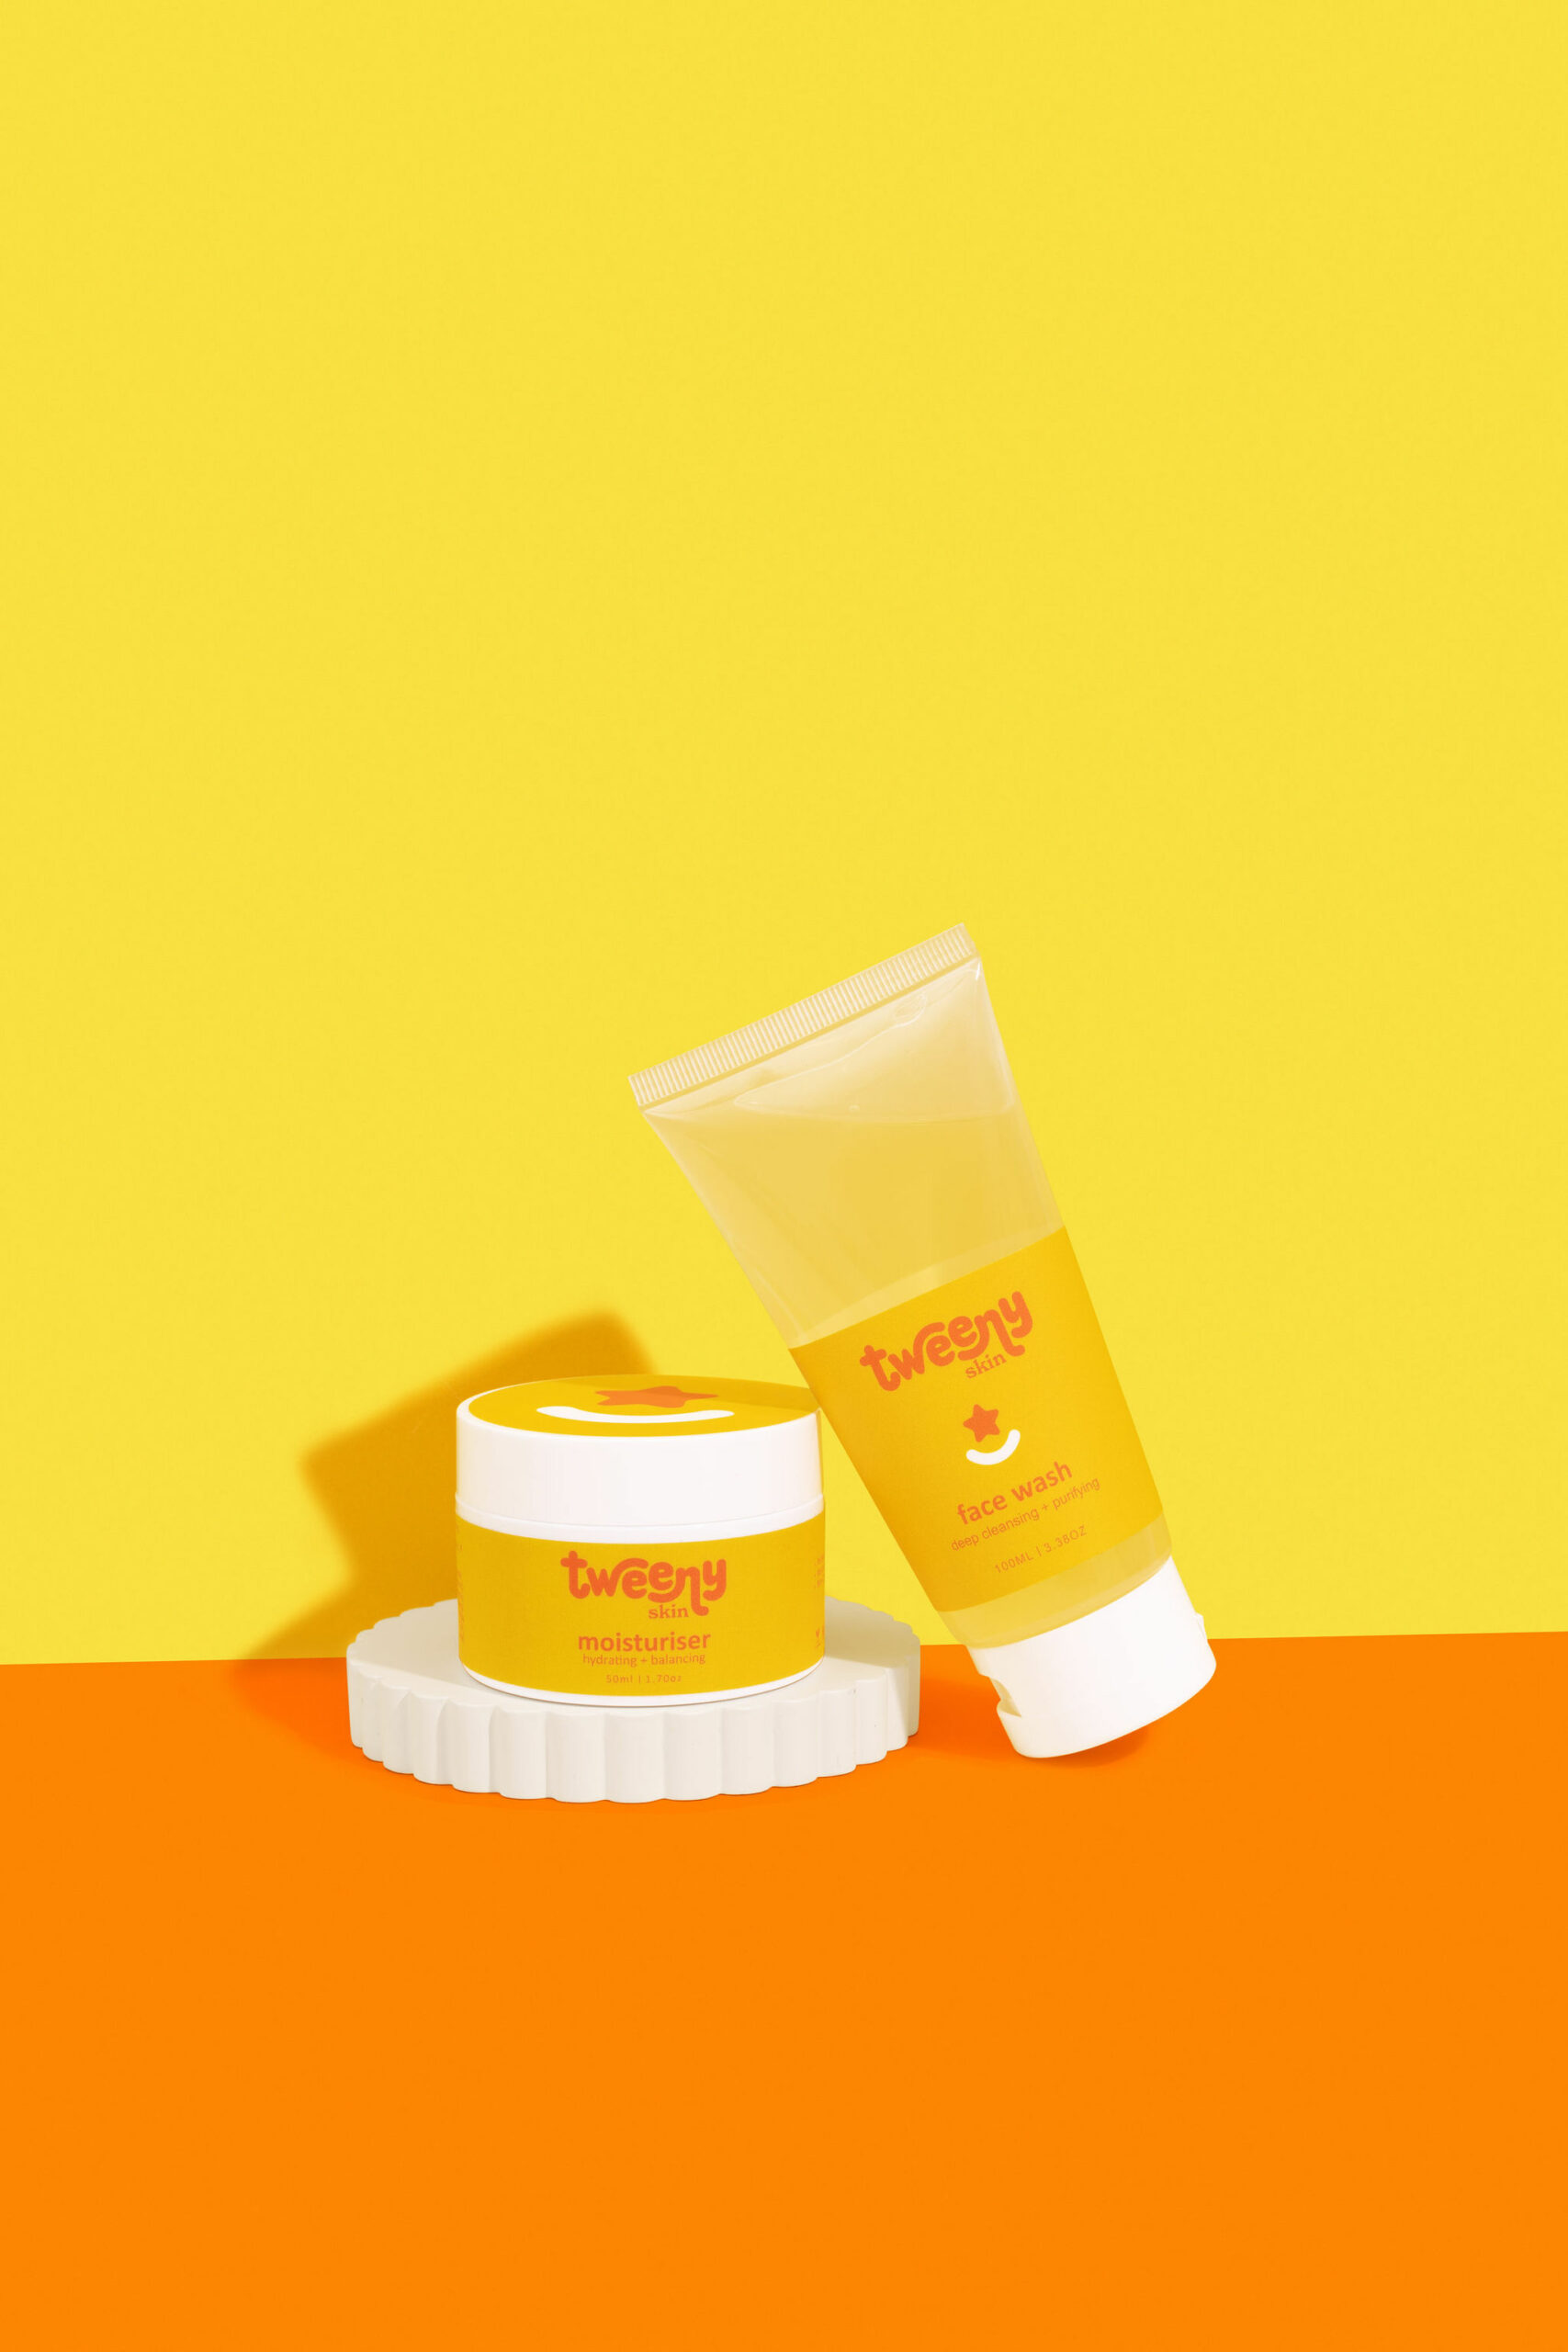 bright and bold product photography for a tween skincare brand. Creative product photography by Colourpop Studio